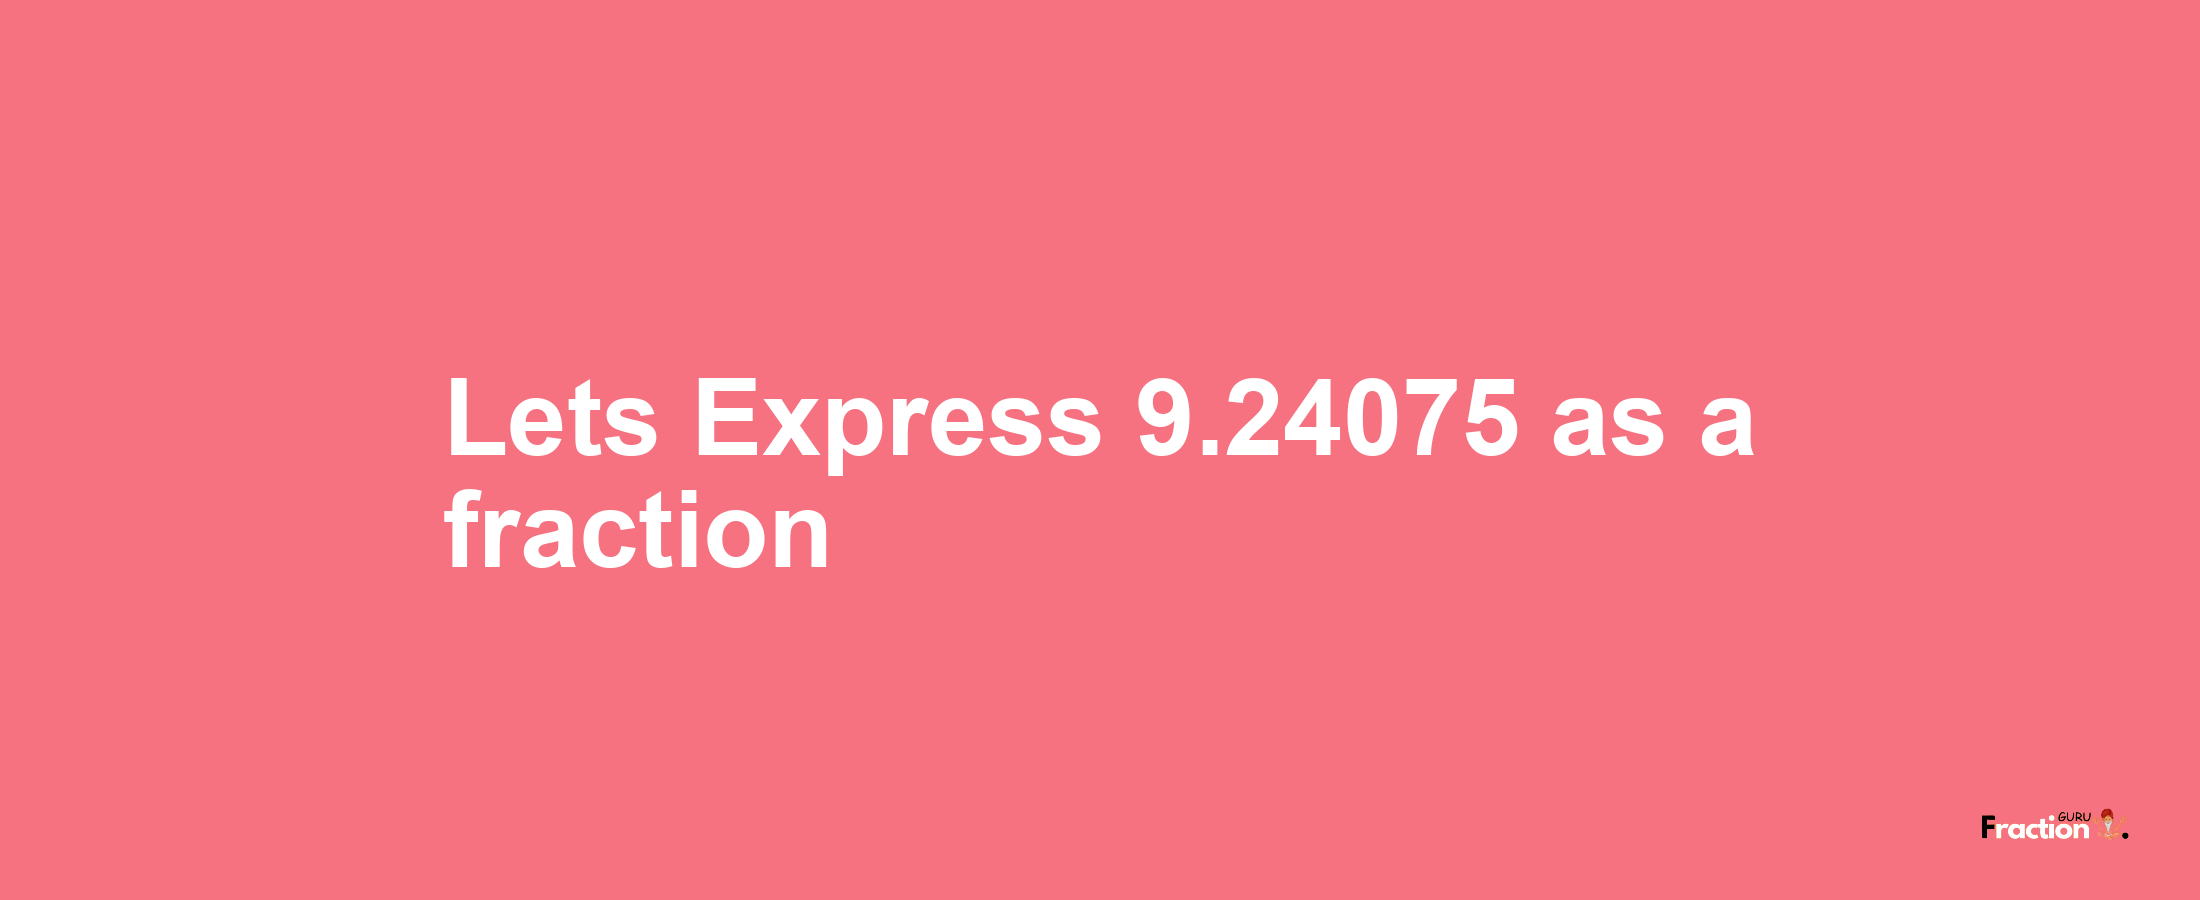 Lets Express 9.24075 as afraction